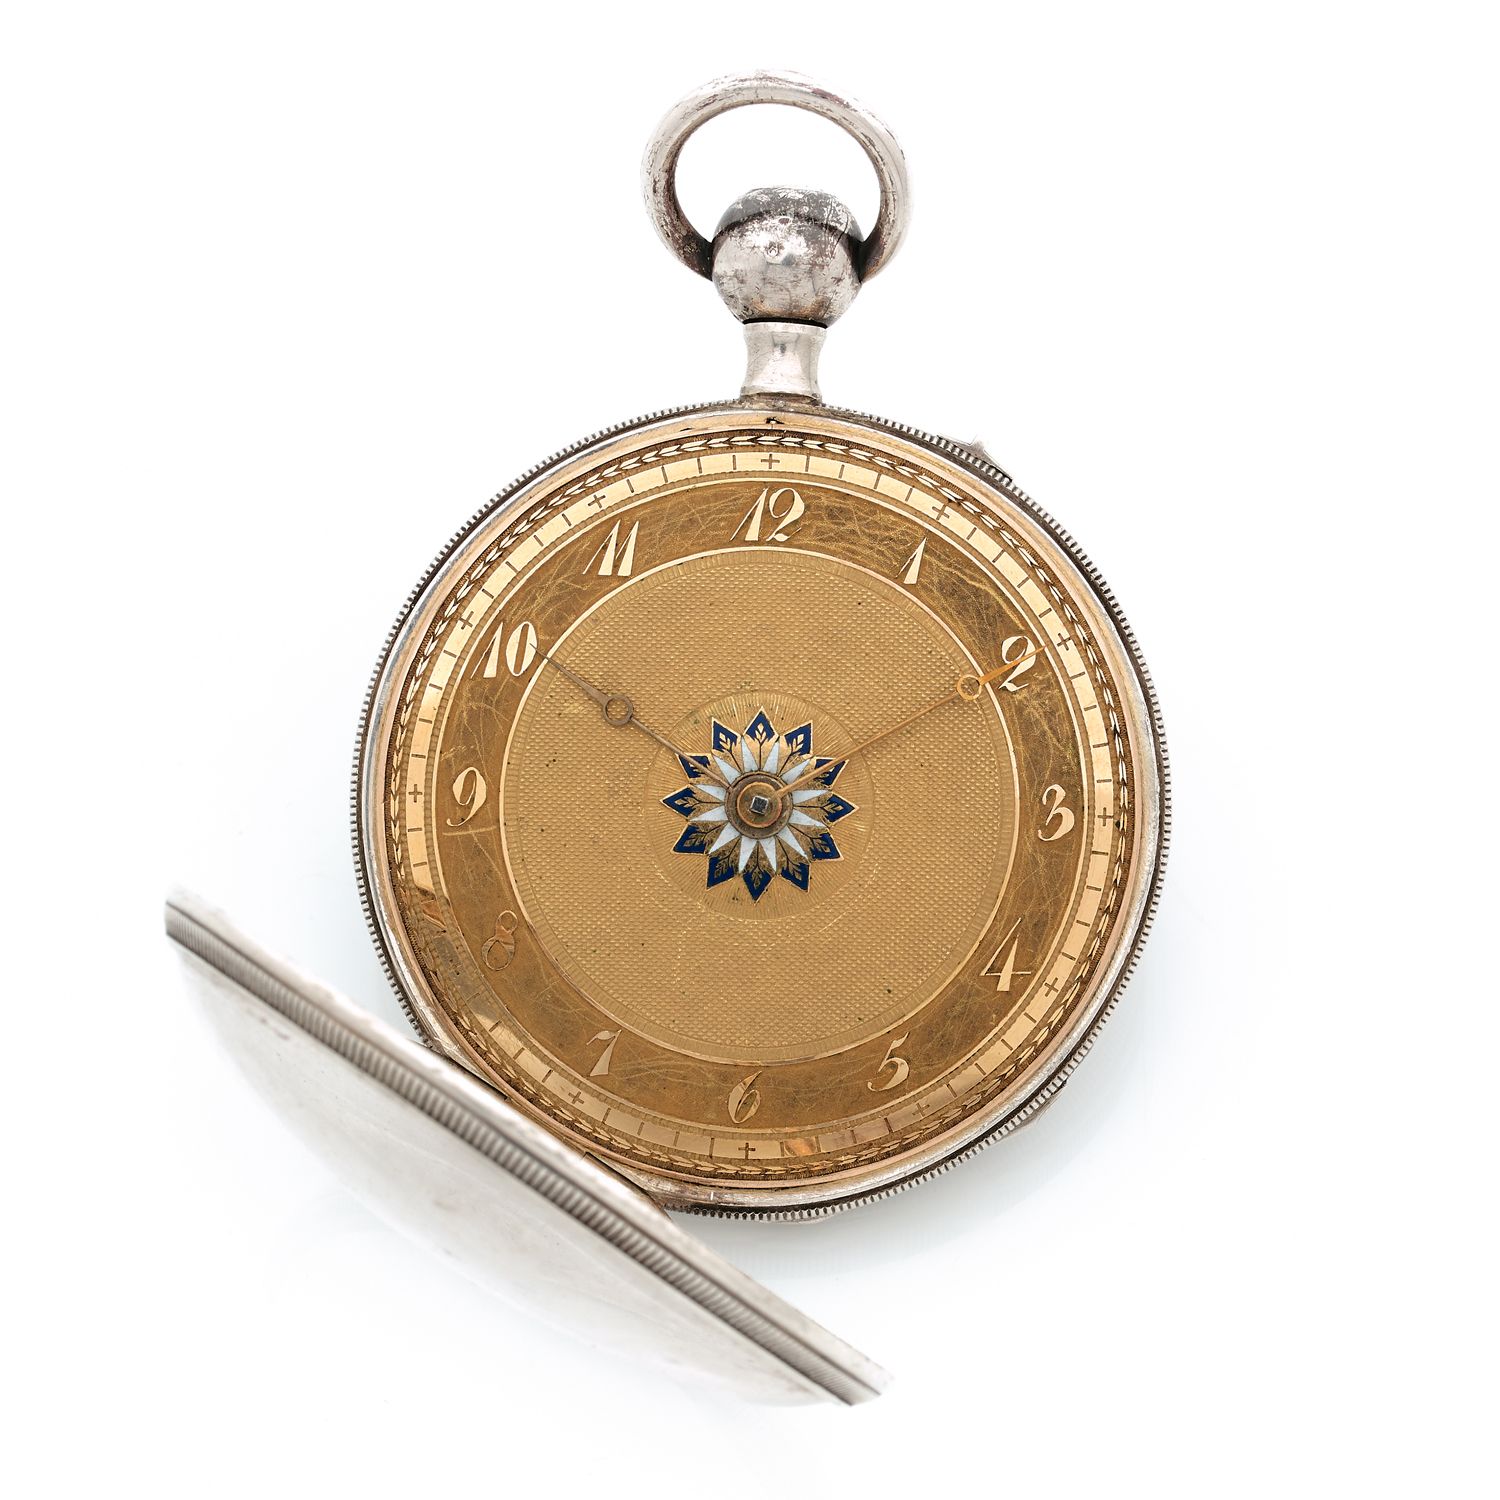 Null REPETITION OF THE QUARTERS
Quadrature.
About: 1850.
Silver pocket watch wit&hellip;